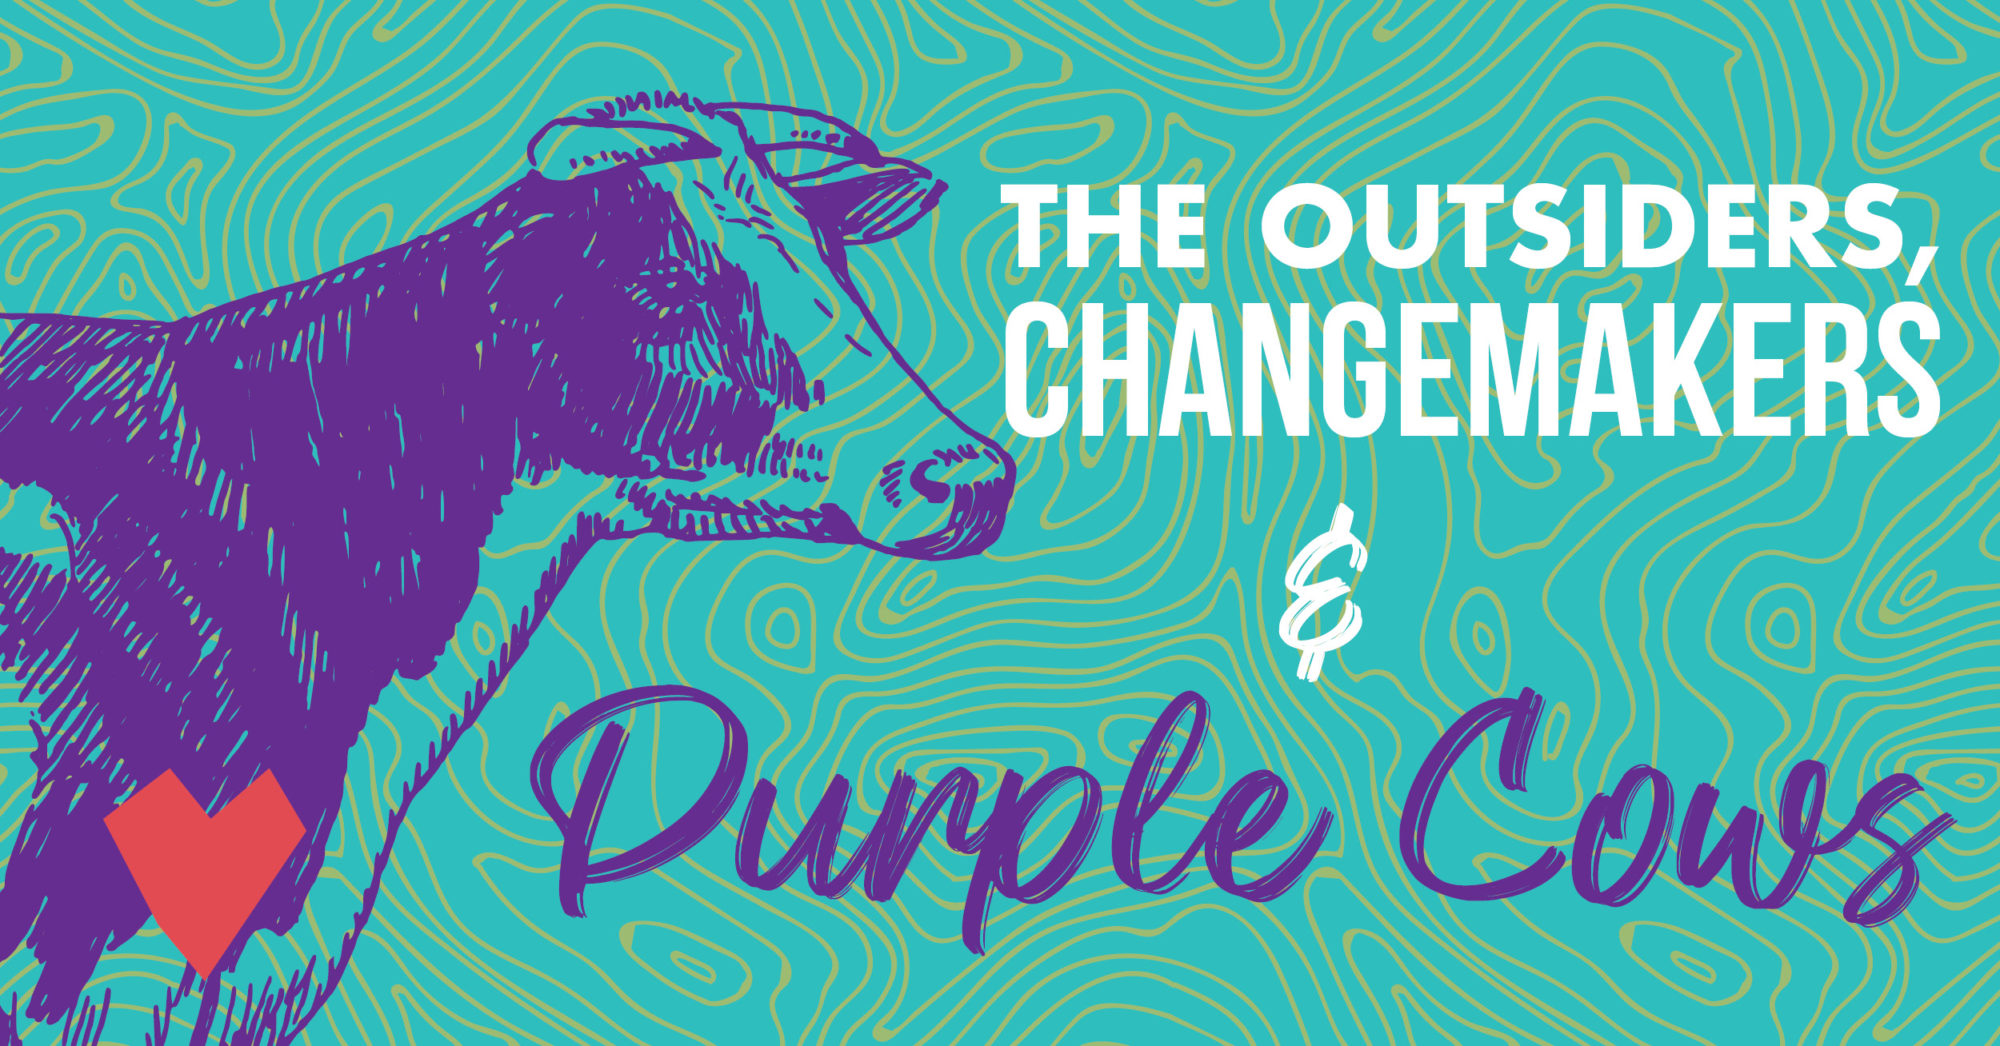 A teal background with a purple cow and red heart illustration with text, "The Outsiders, Changemakers & Purple Cows."